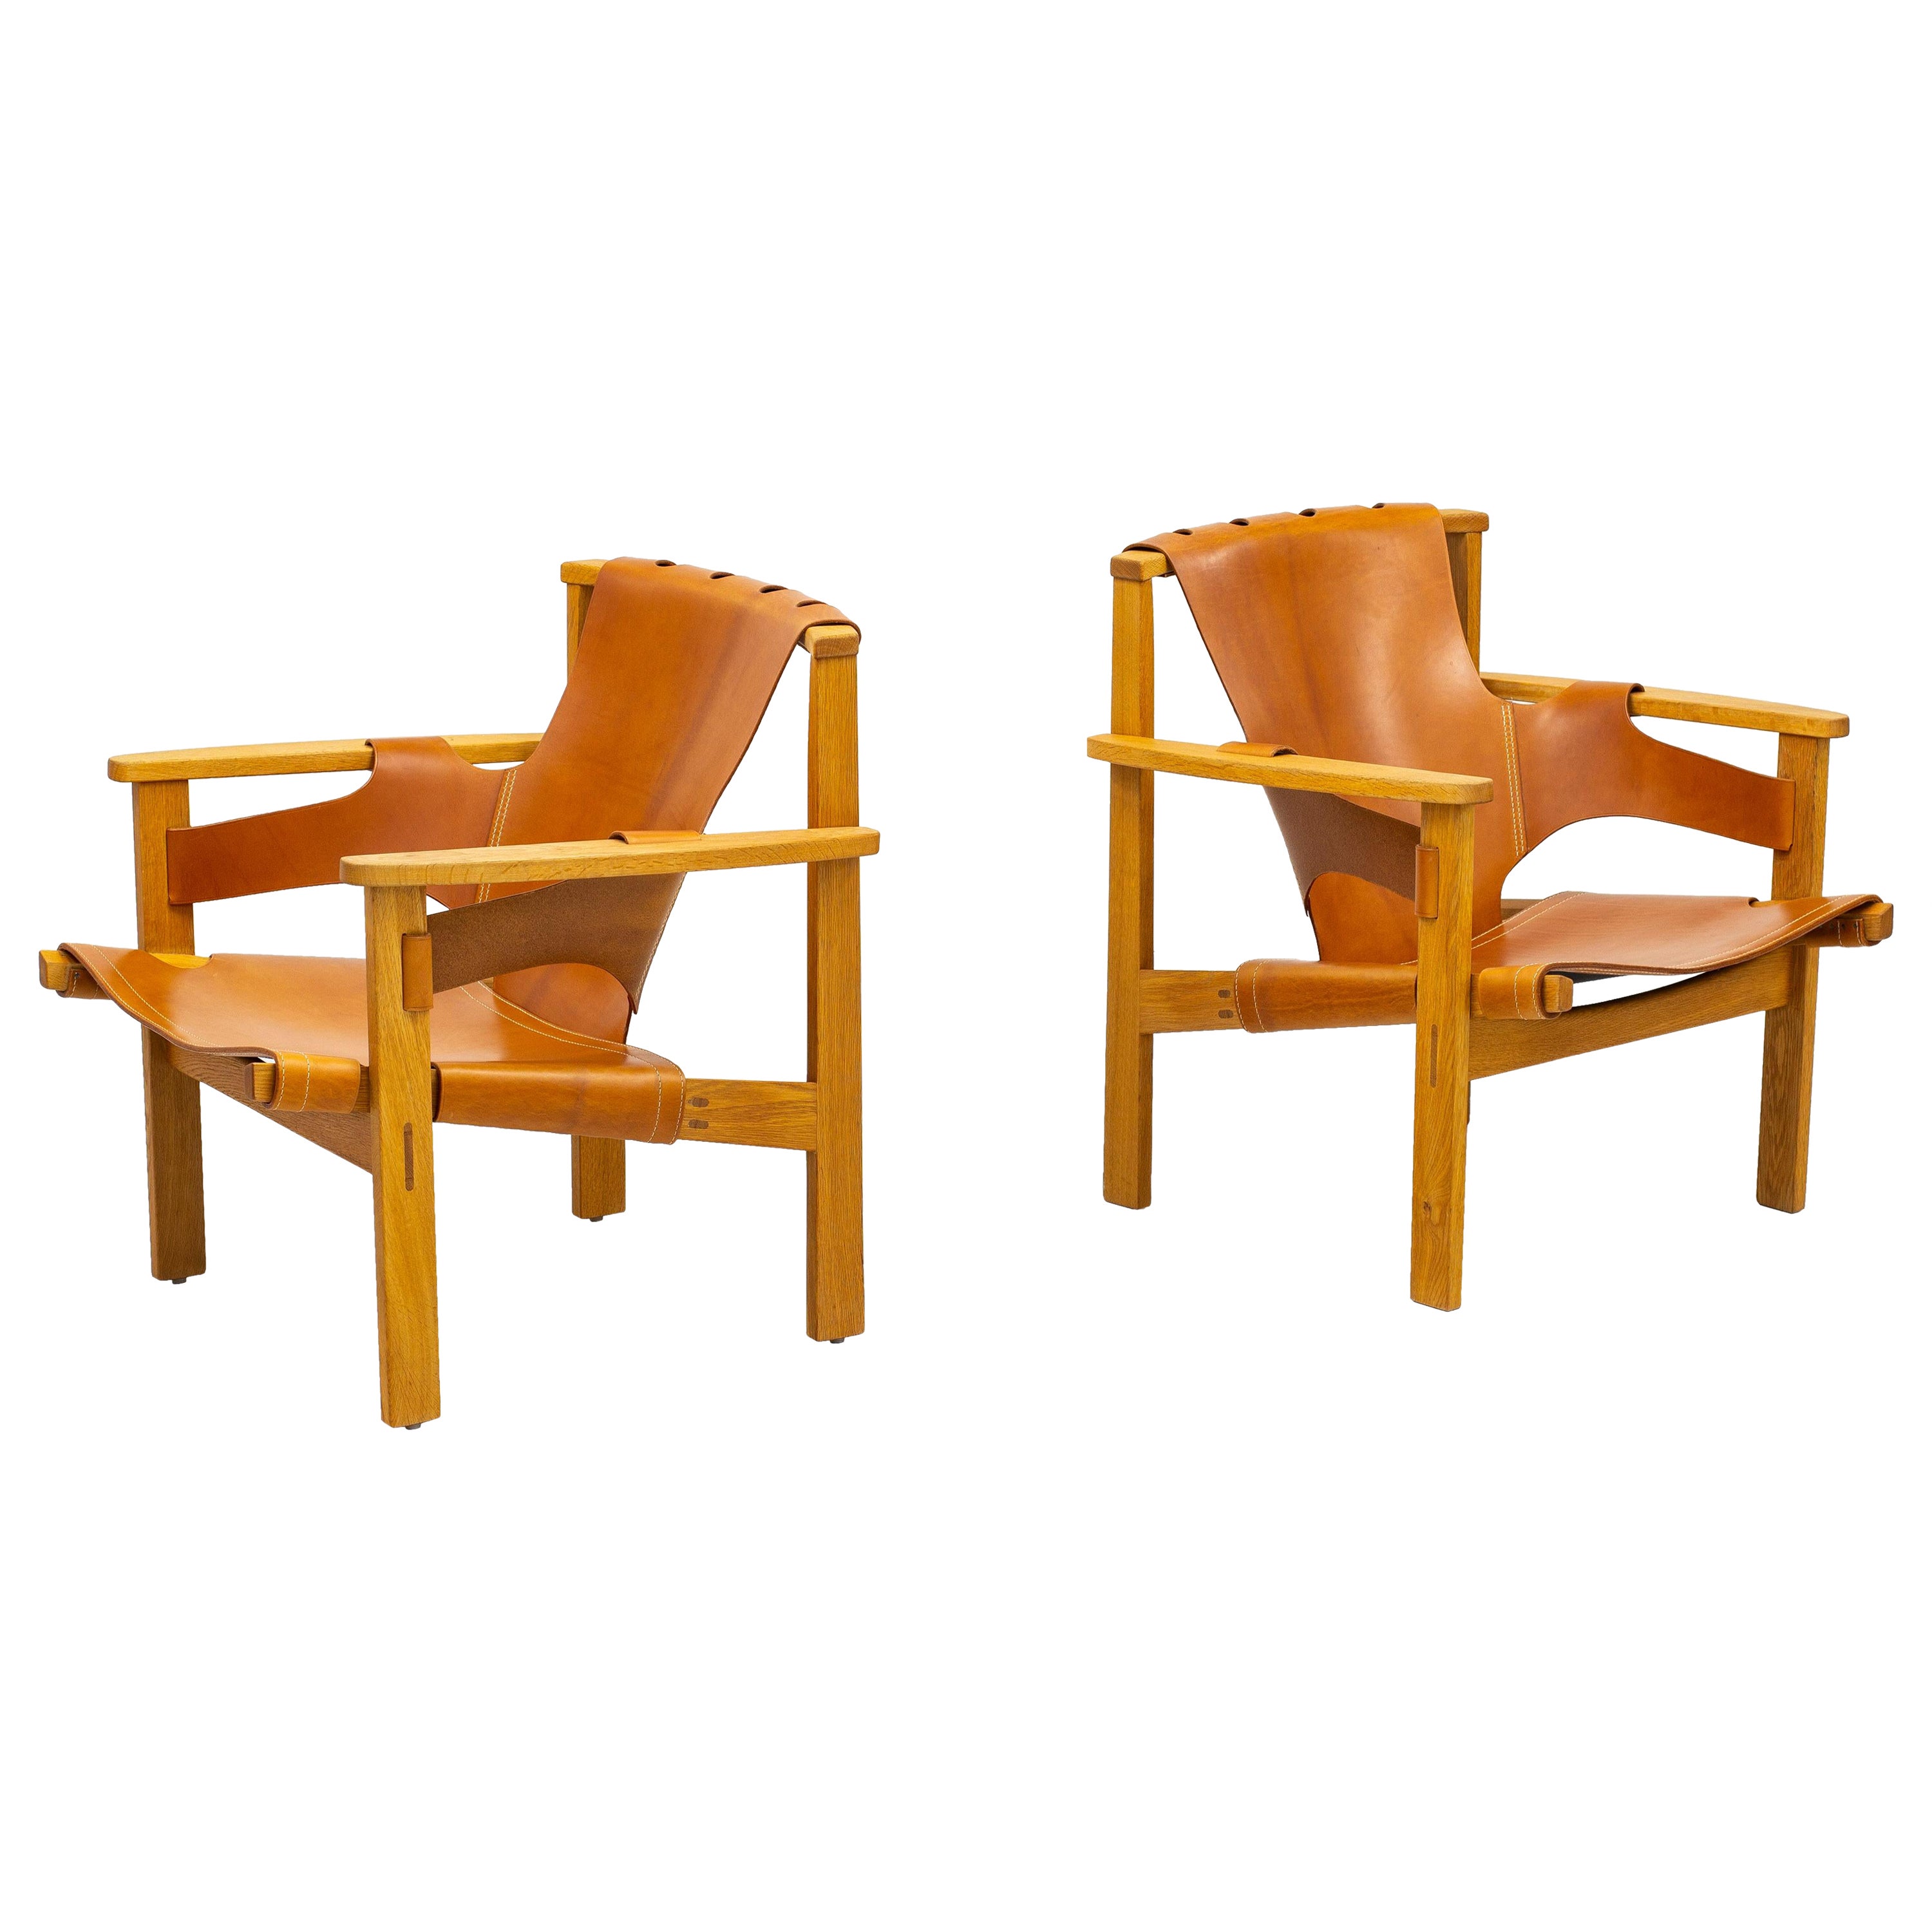 Lounge Chairs in Oak and Leather by Carl-Axel Acking, Nk, Nordiska Kompaniet